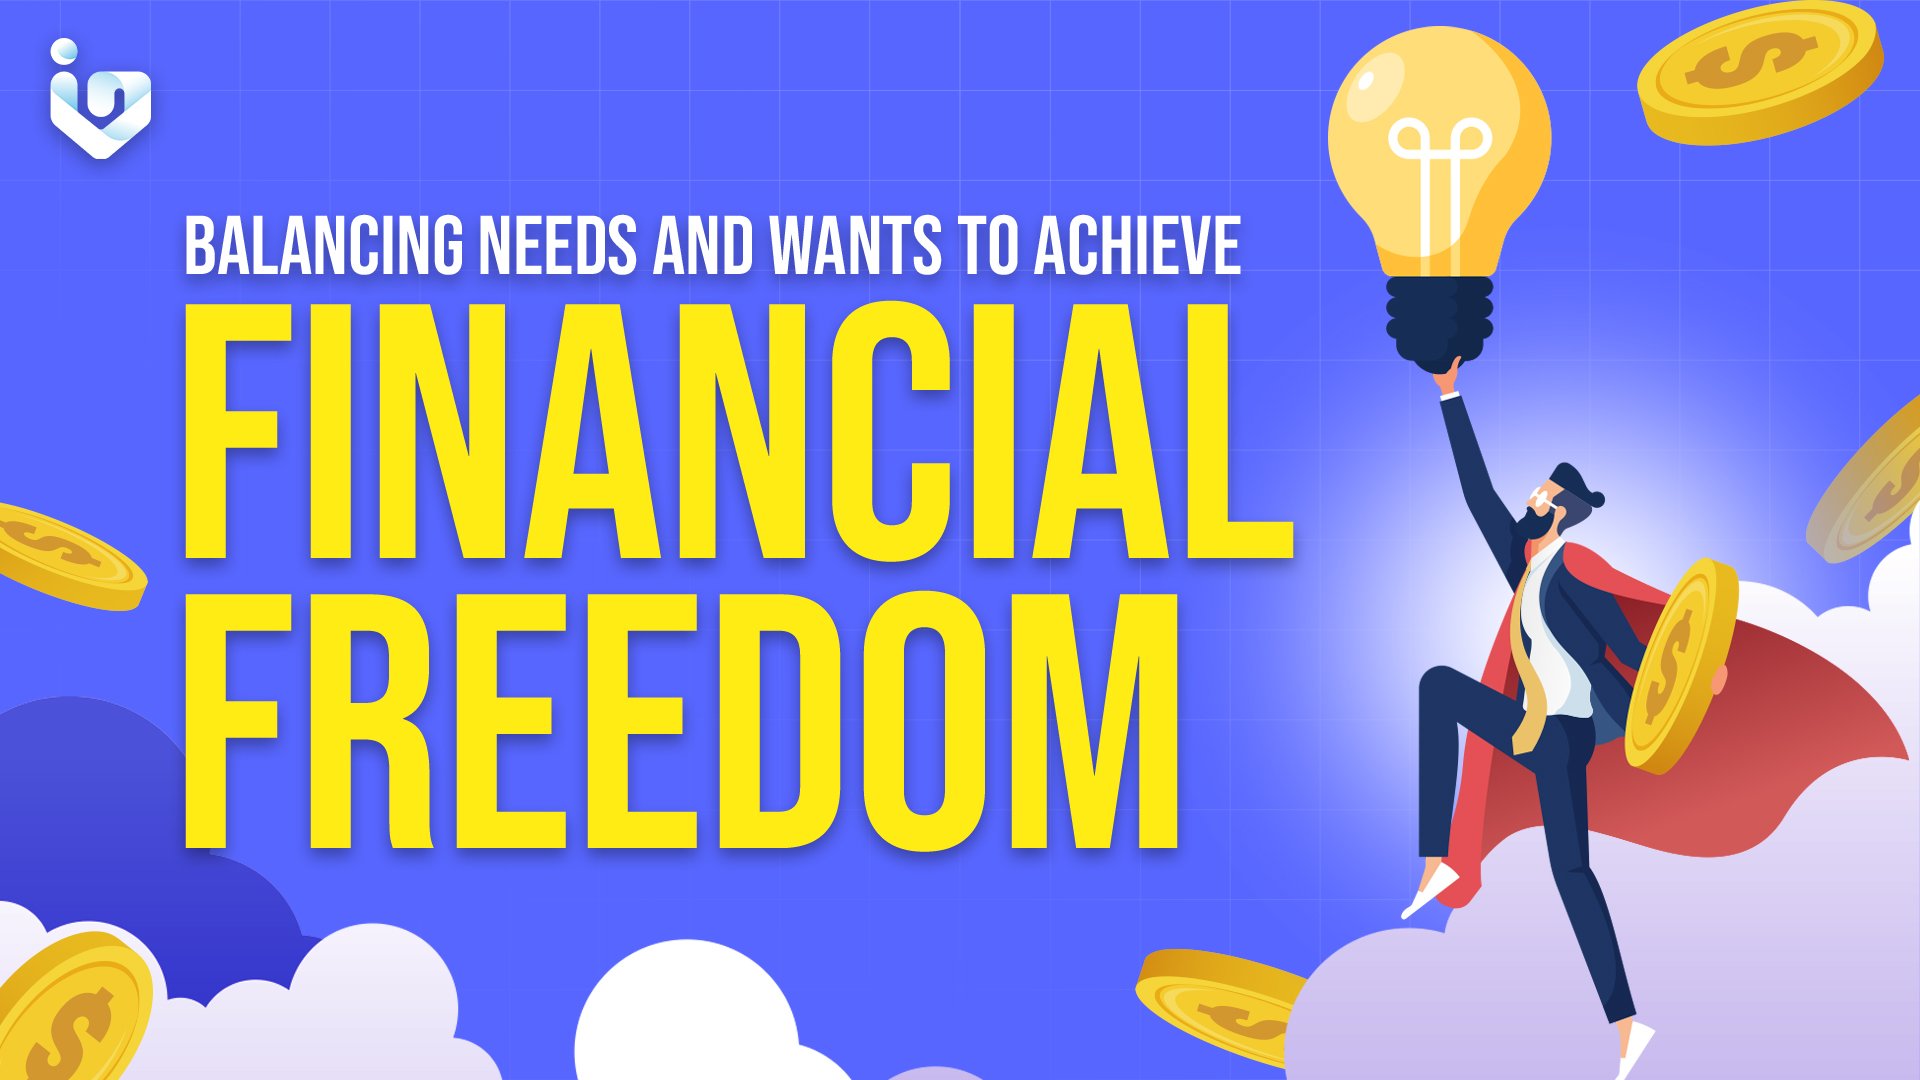 Balancing Needs and Wants to Achieve Financial Freedom